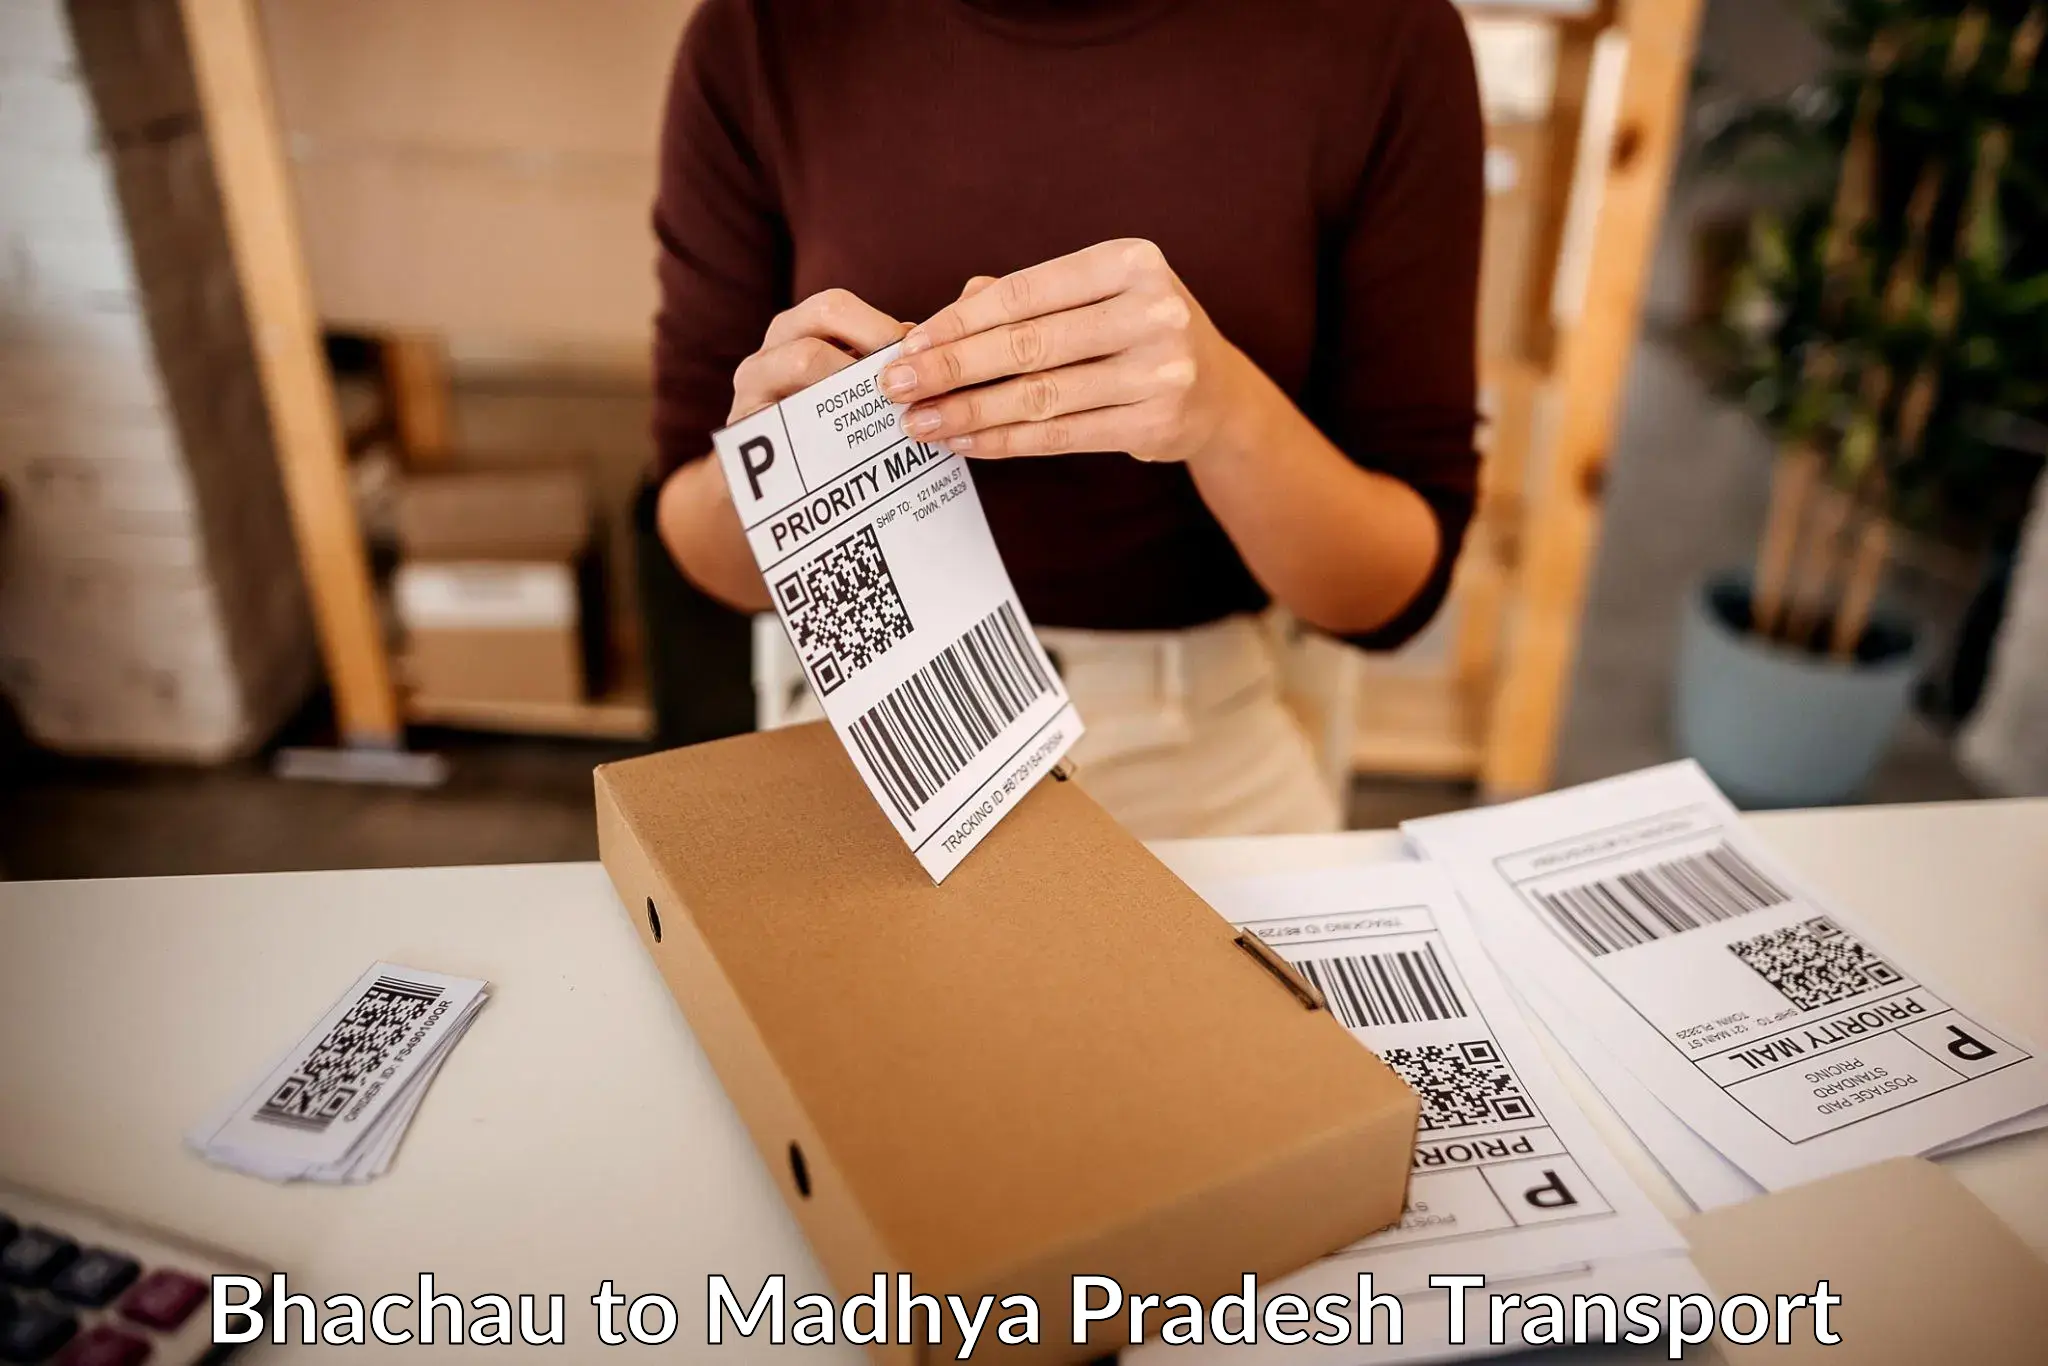 Goods delivery service Bhachau to Indore